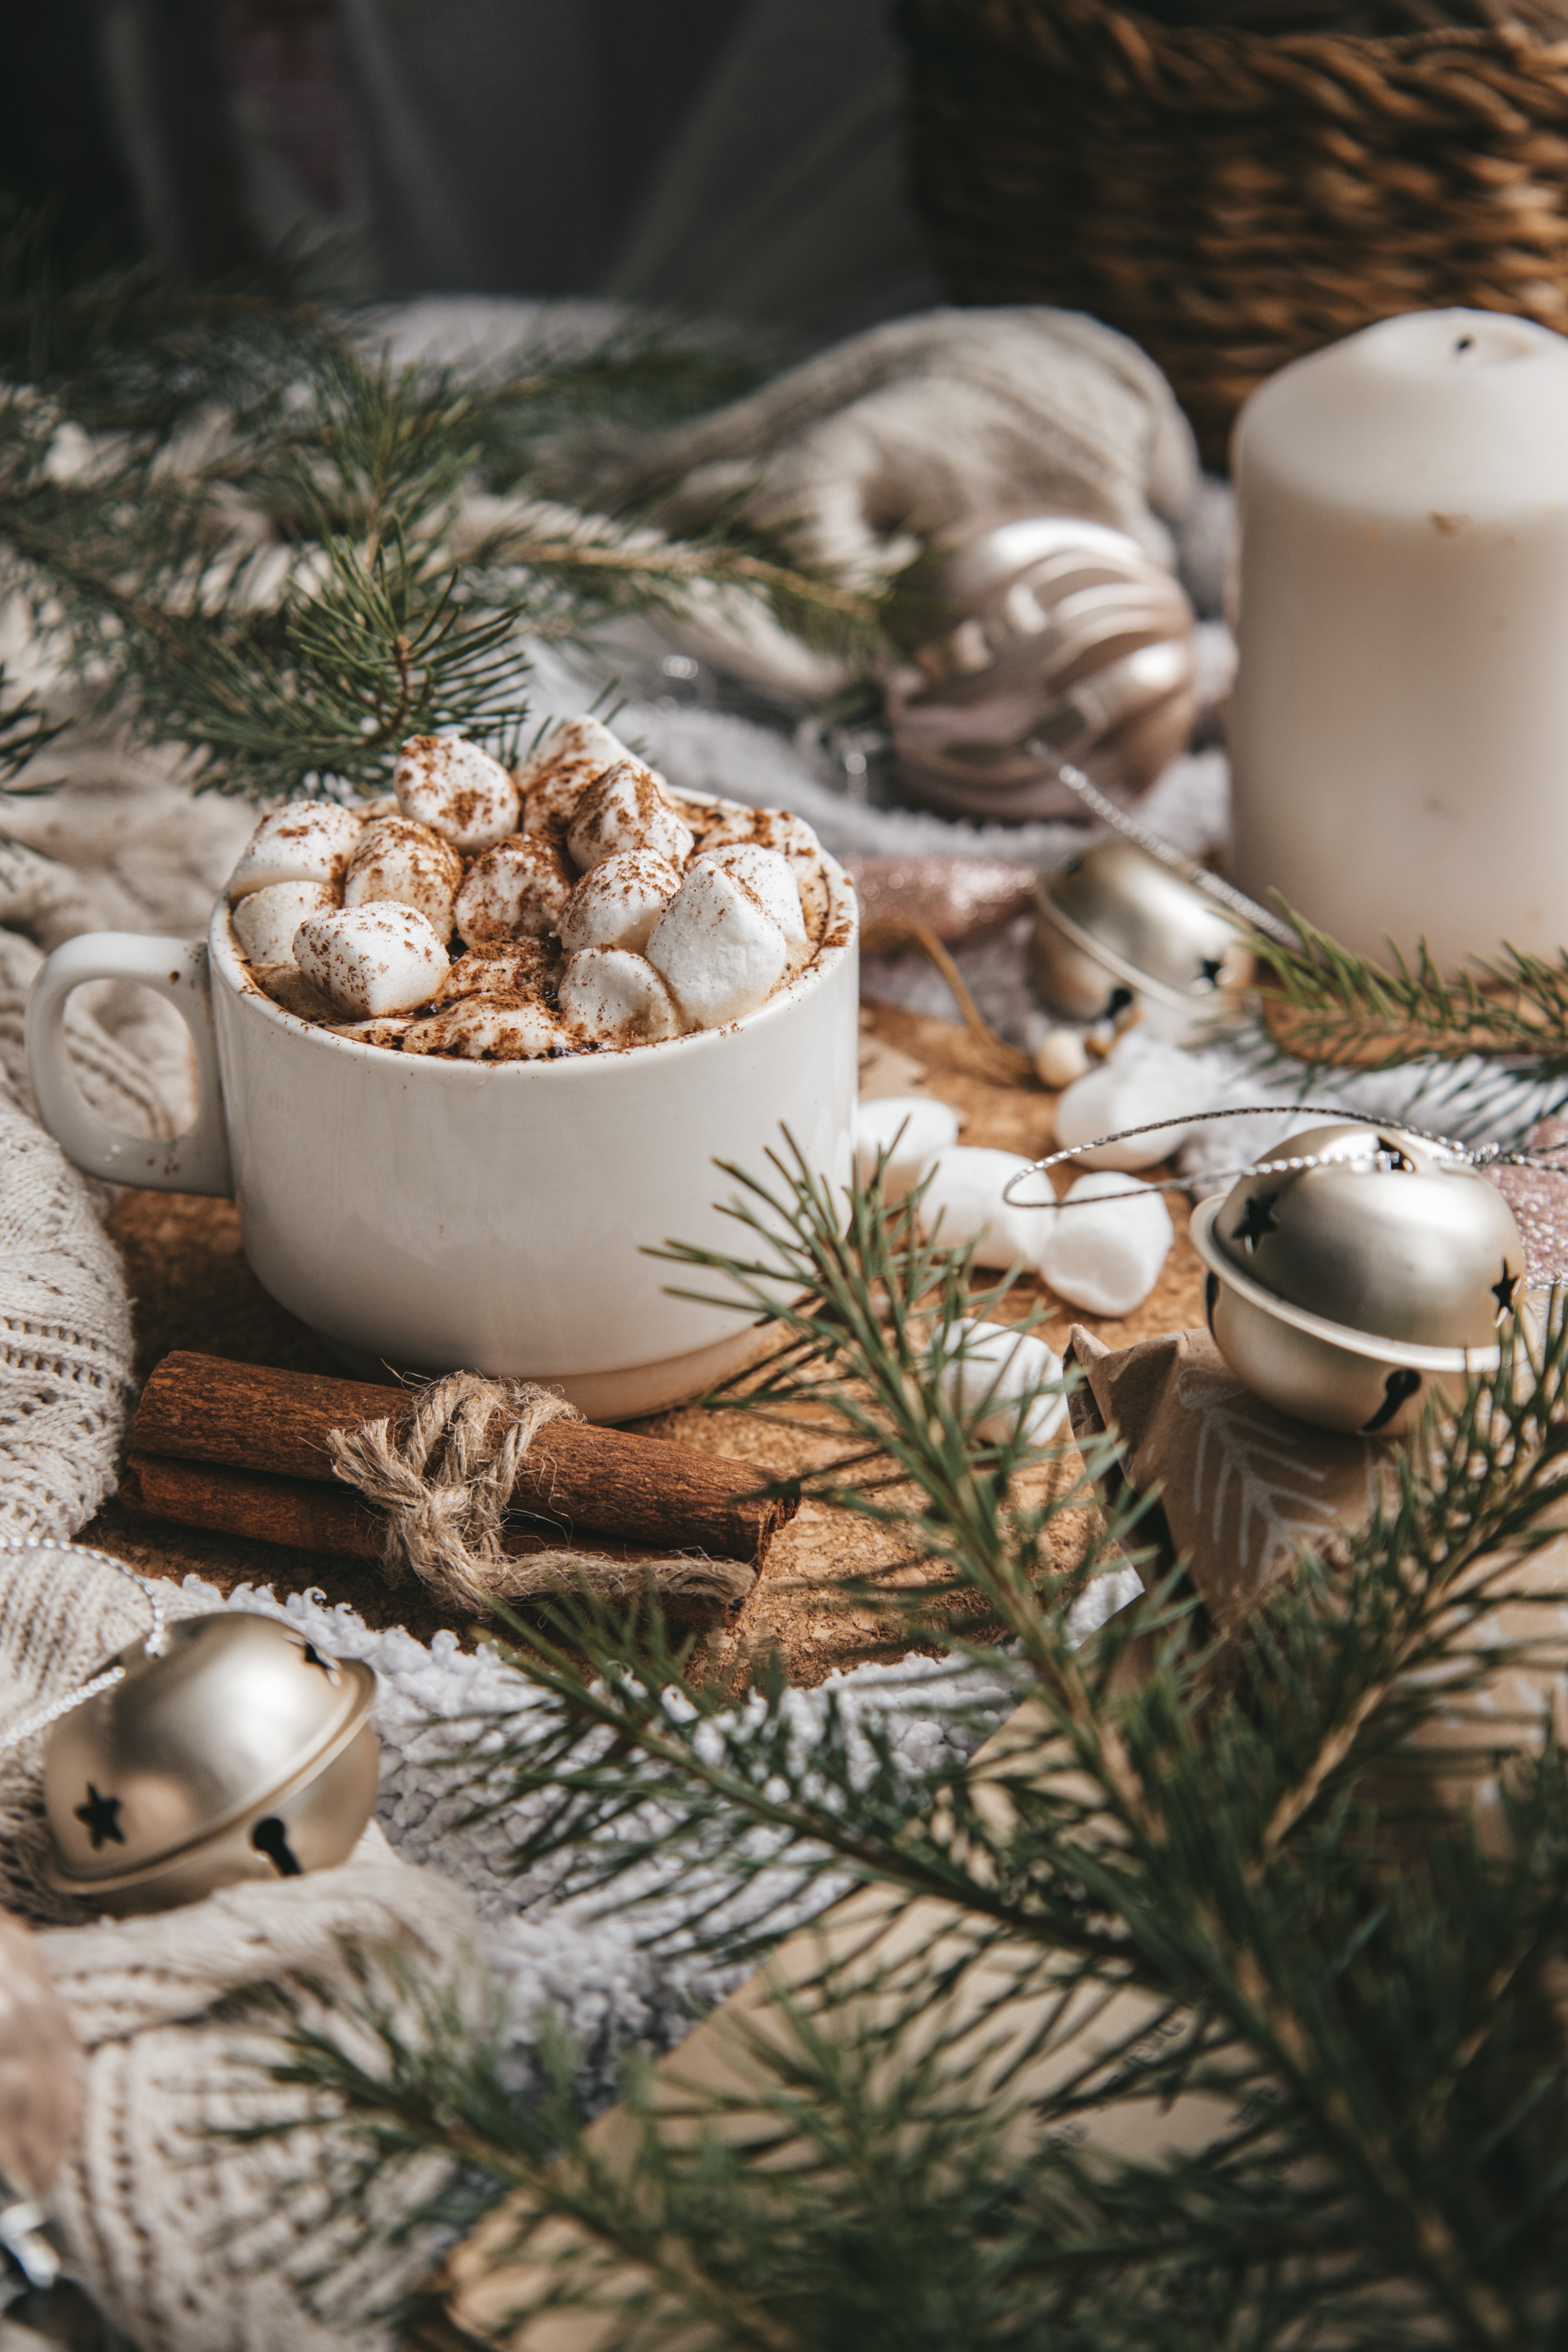 decorations, zephyr, food, cinnamon, cup, branches, marshmallow